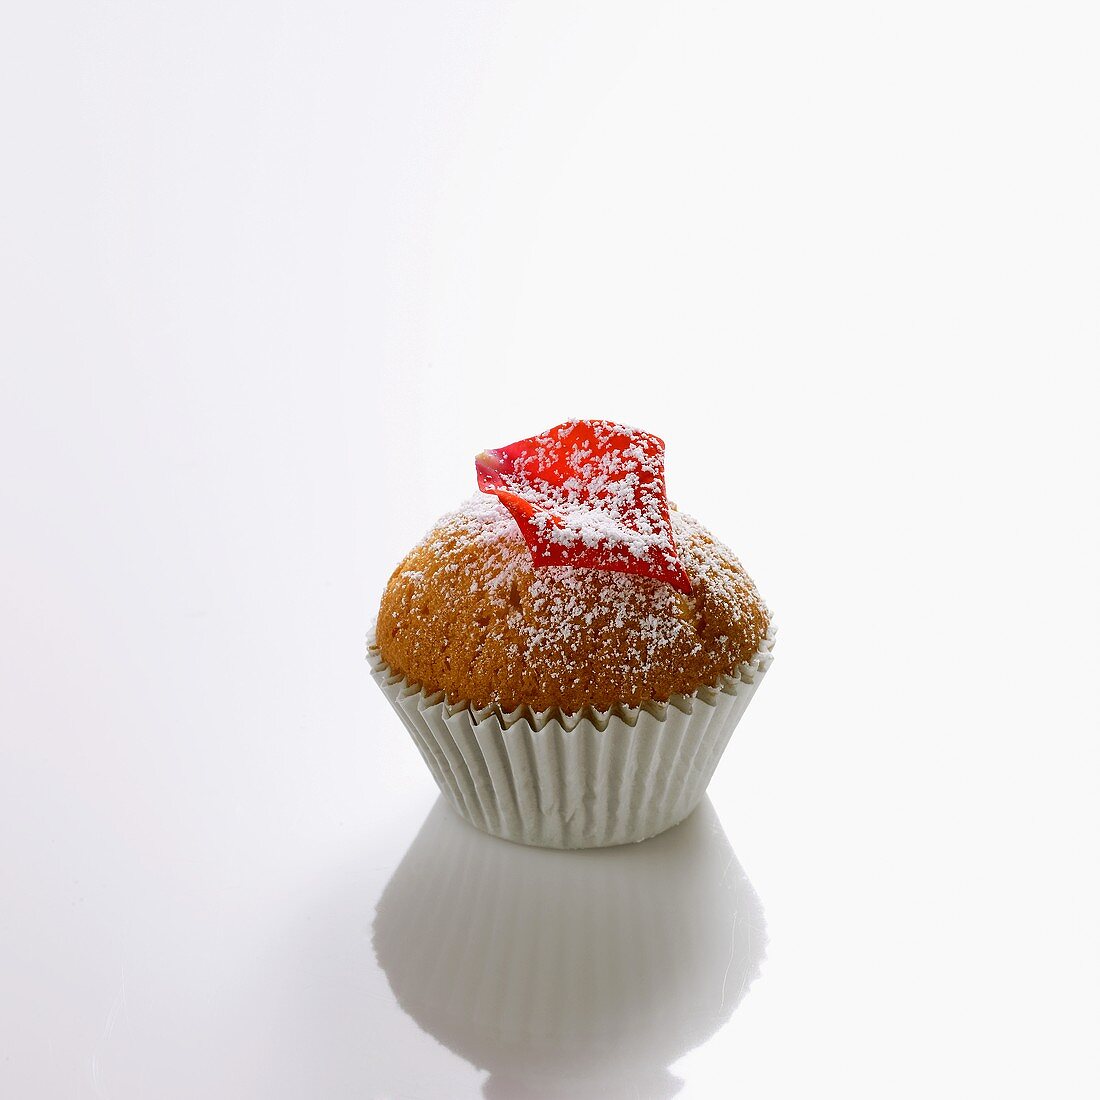 Mini-muffin with rose petal and icing sugar